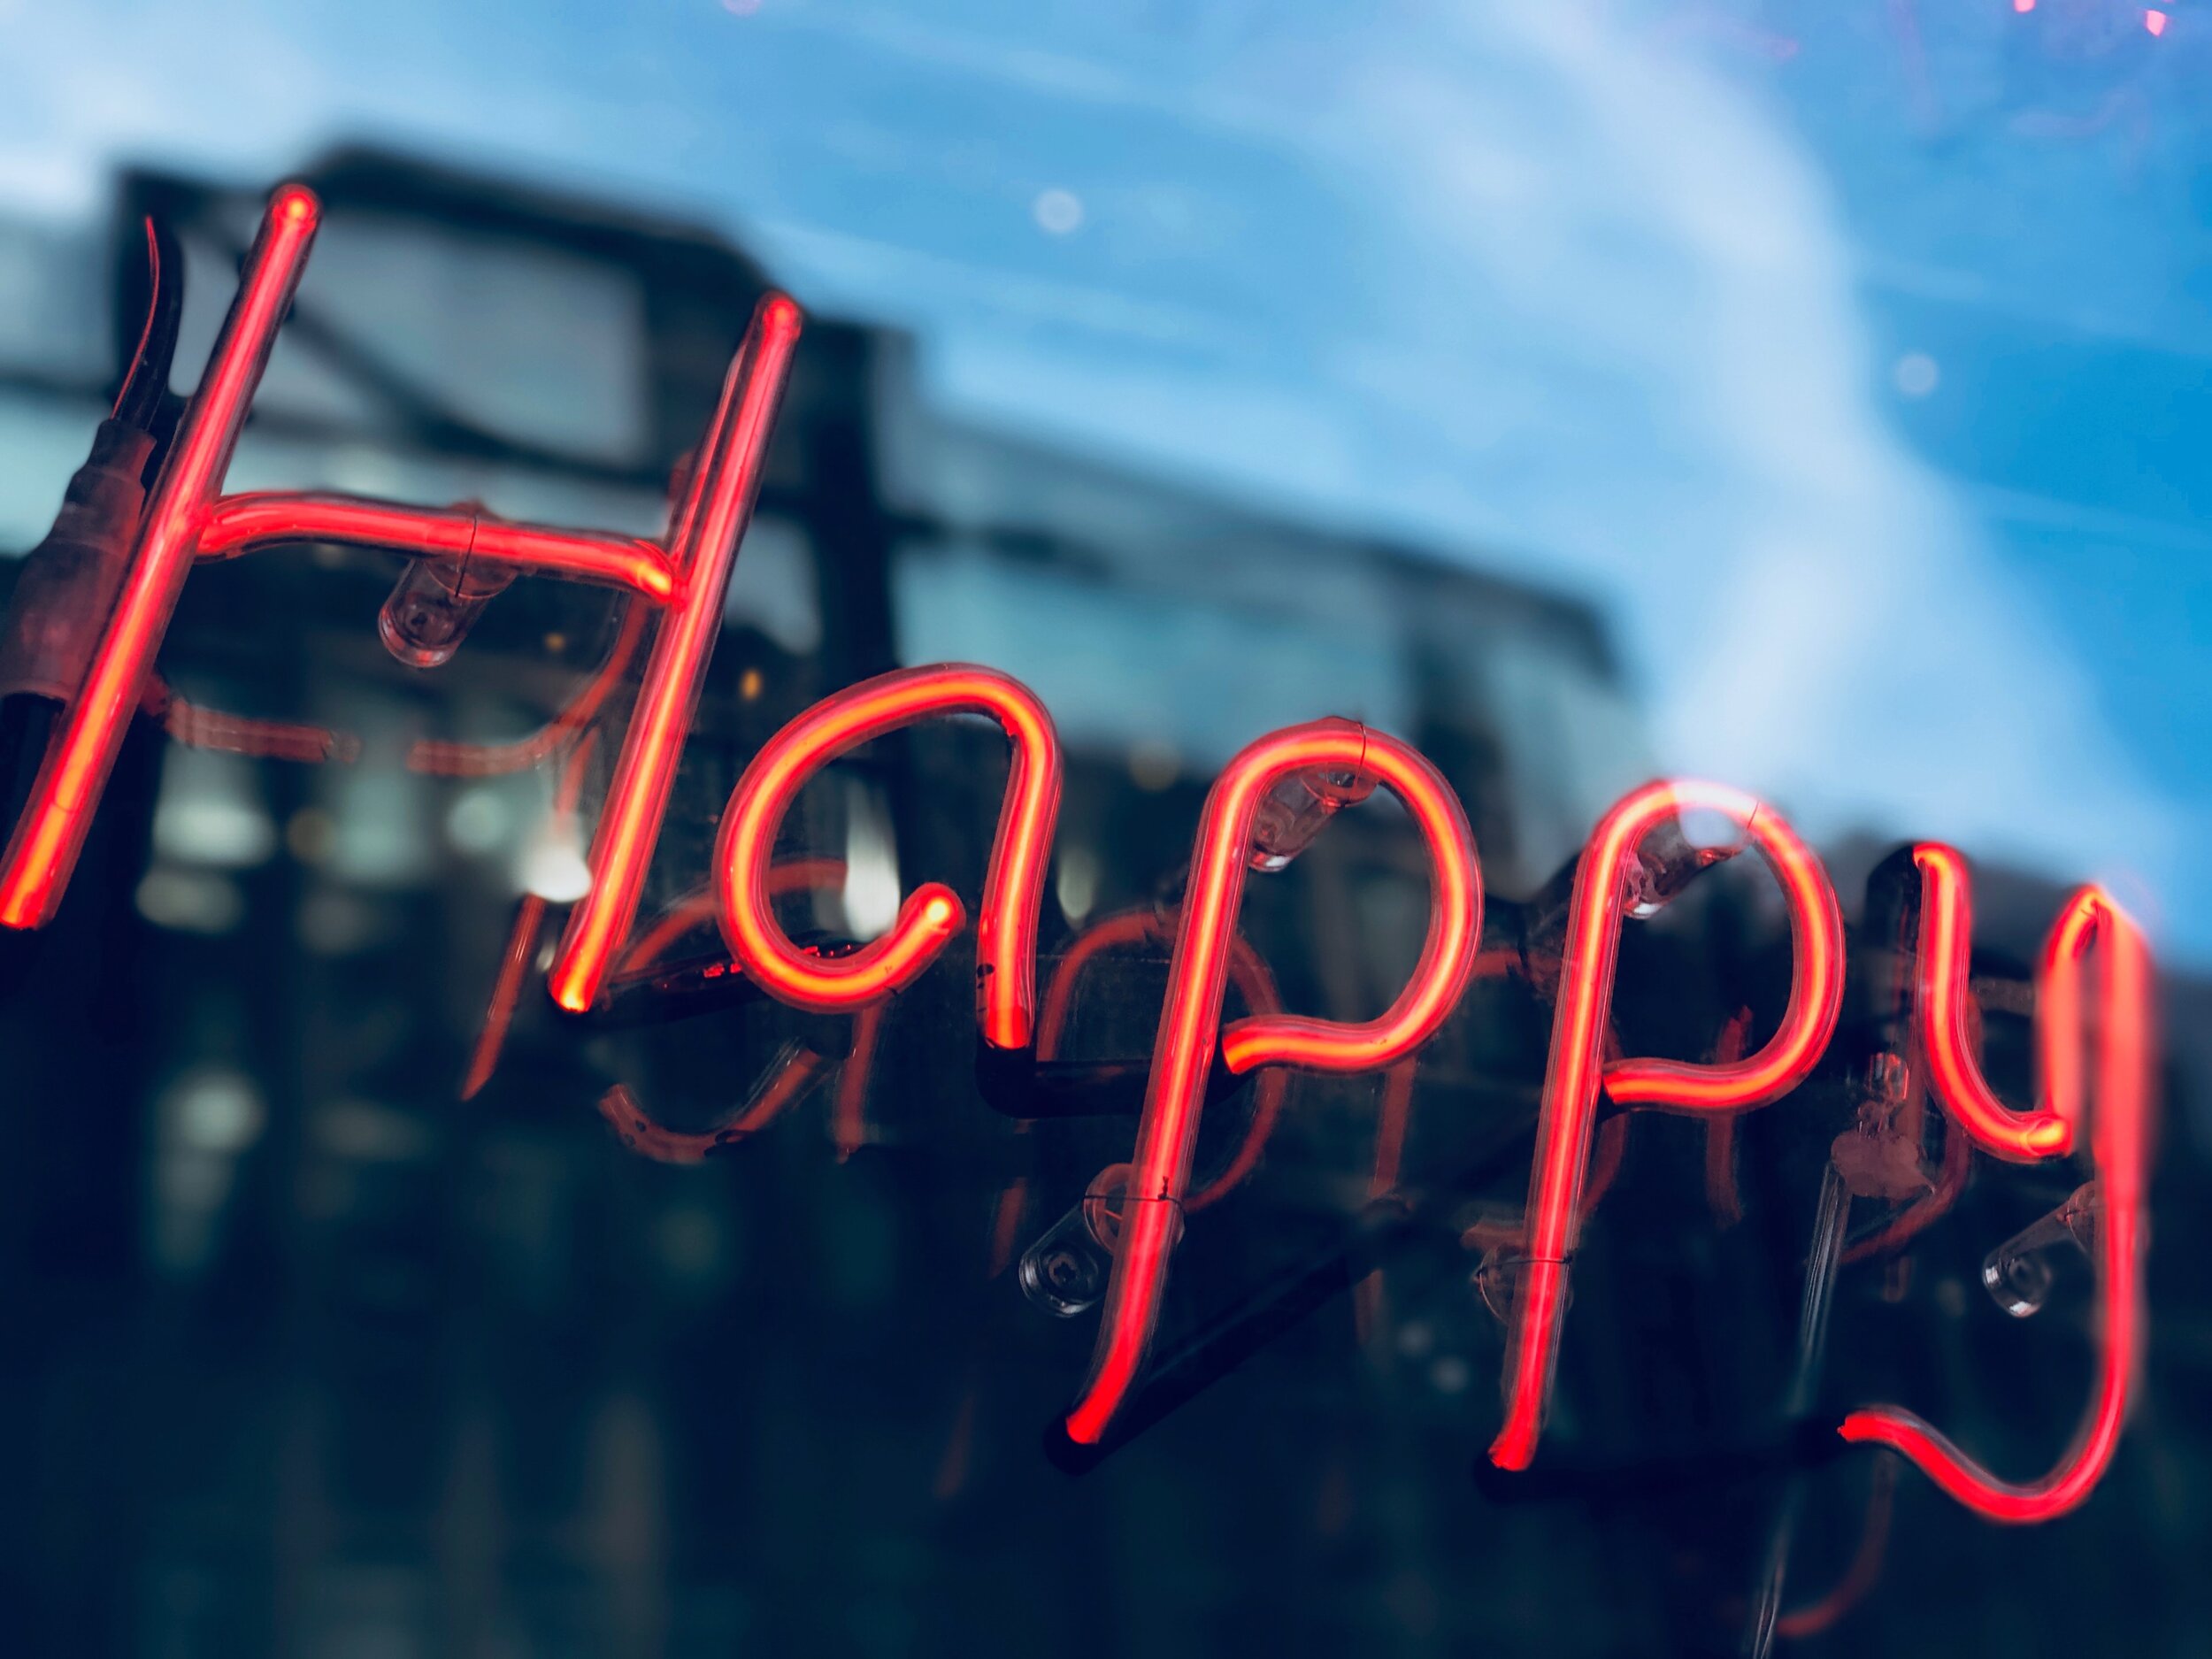 Is Happiness Feeling What’s “Right”?